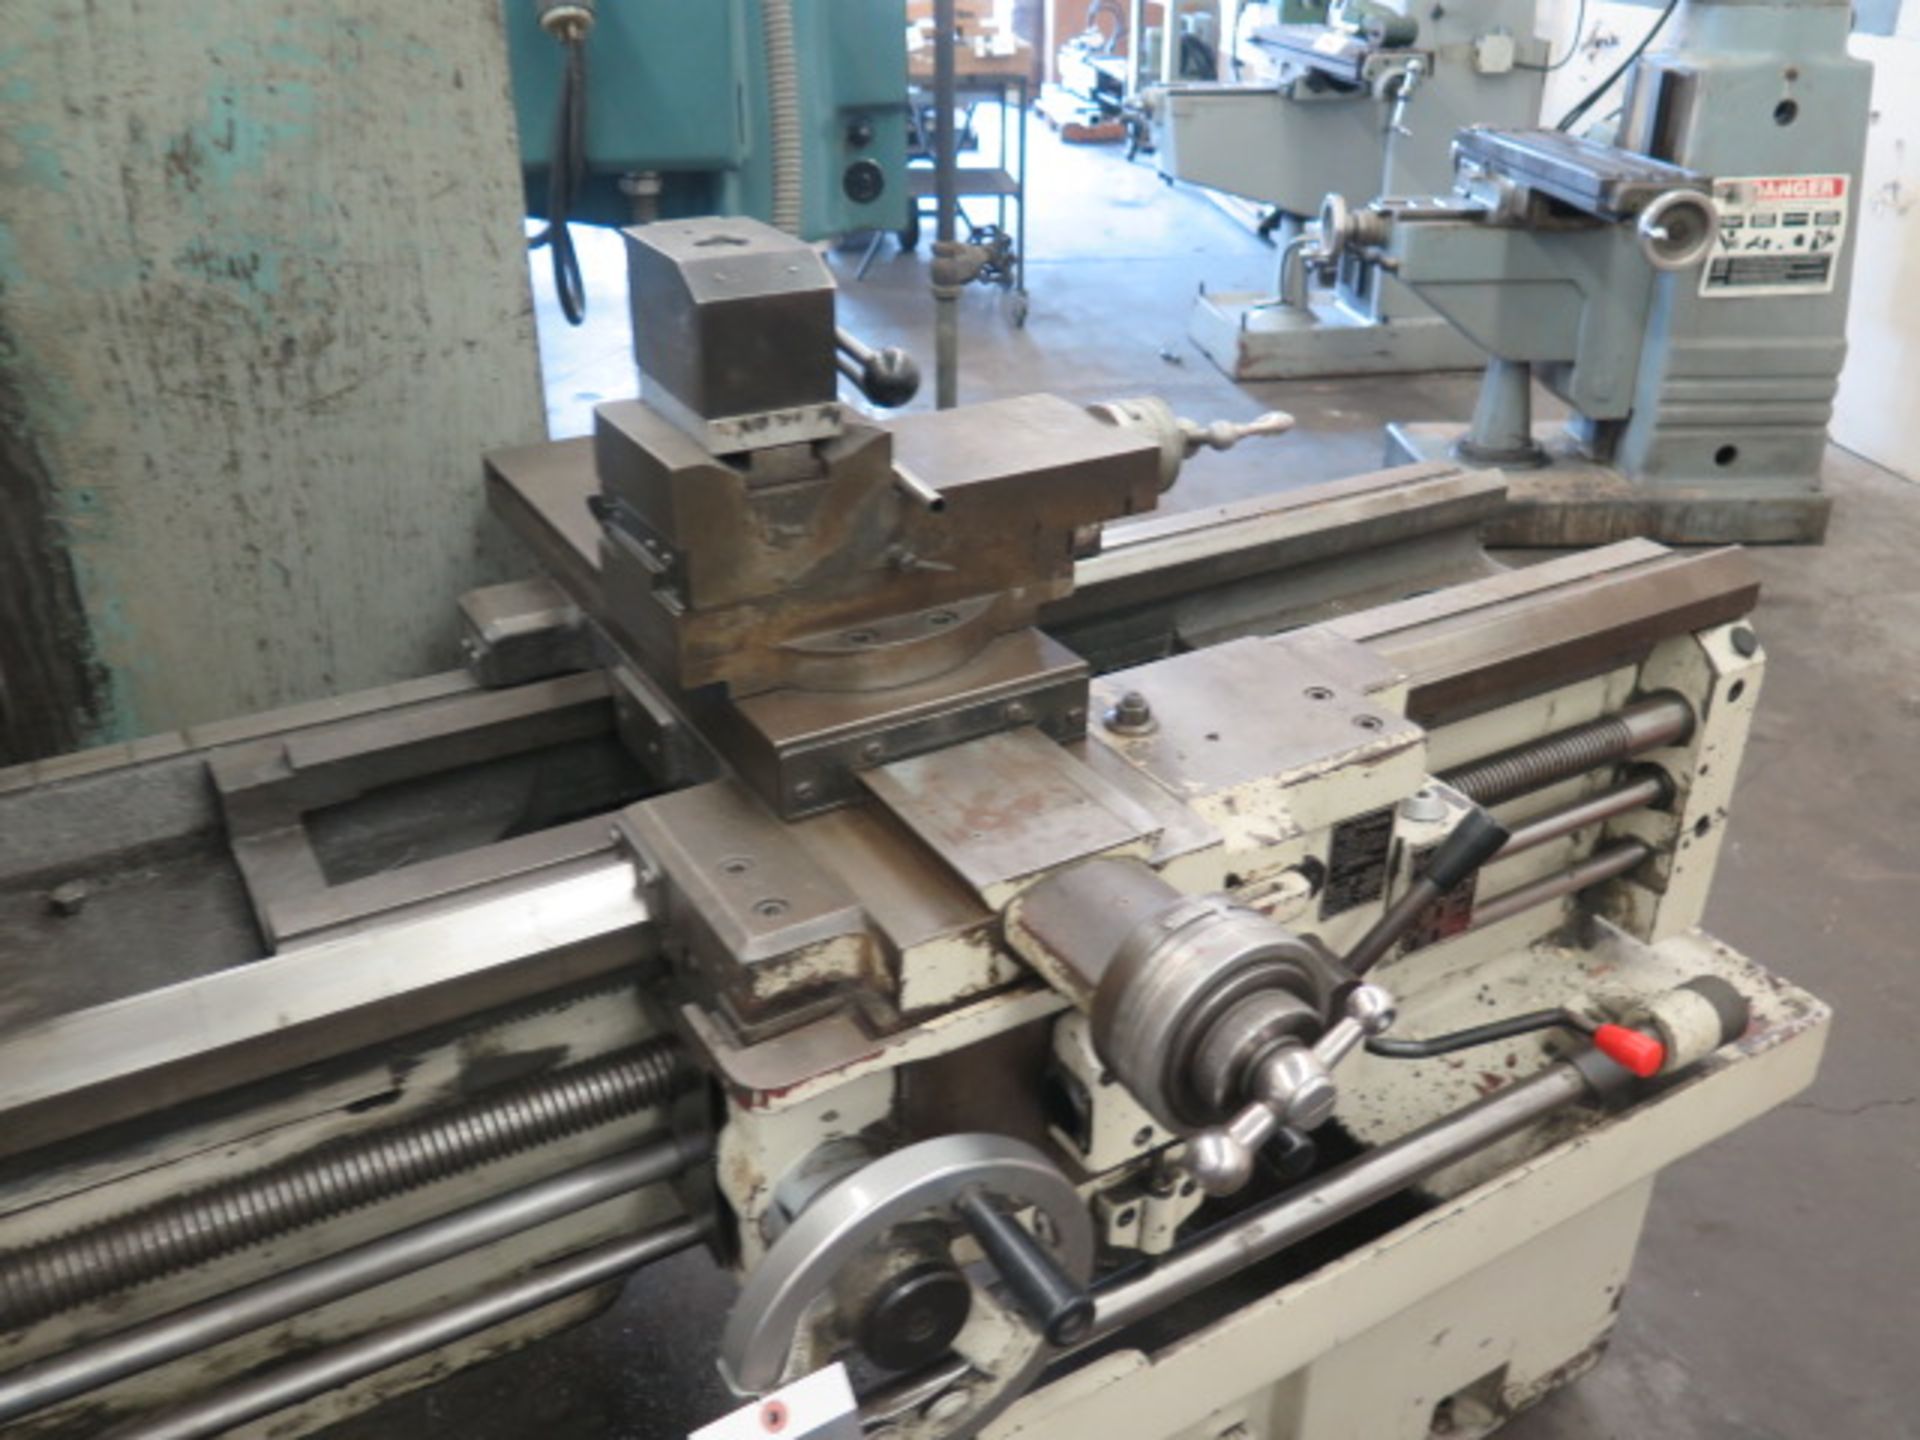 Cadillac 22” Geared Head Gap Bed Lathe s/n B92892 w/ 25-1500 RPM, Inch/mm Threading, SOLD AS IS - Image 8 of 11